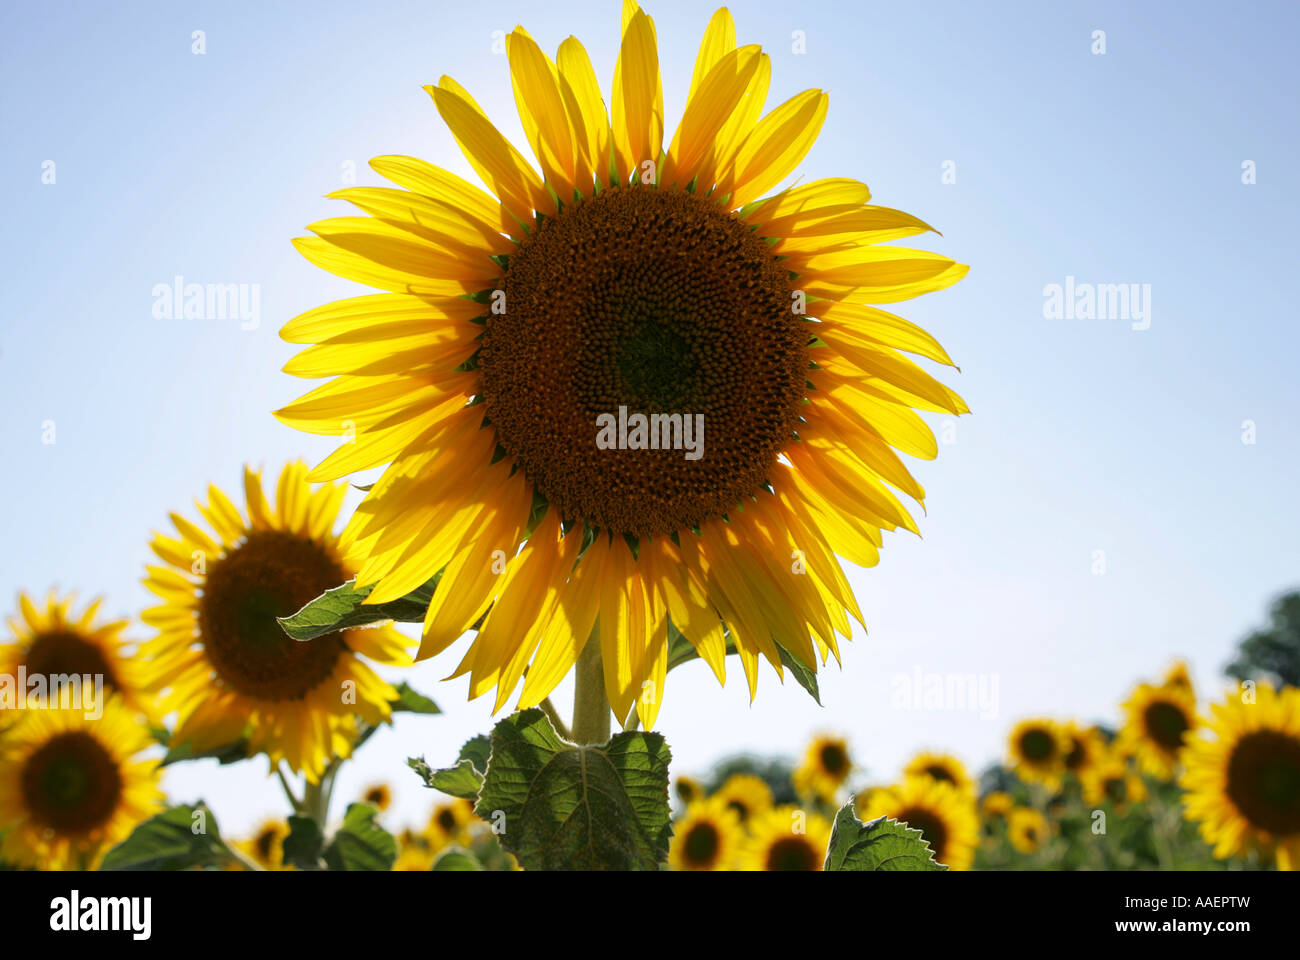 A field of Sunflowers Stock Photo